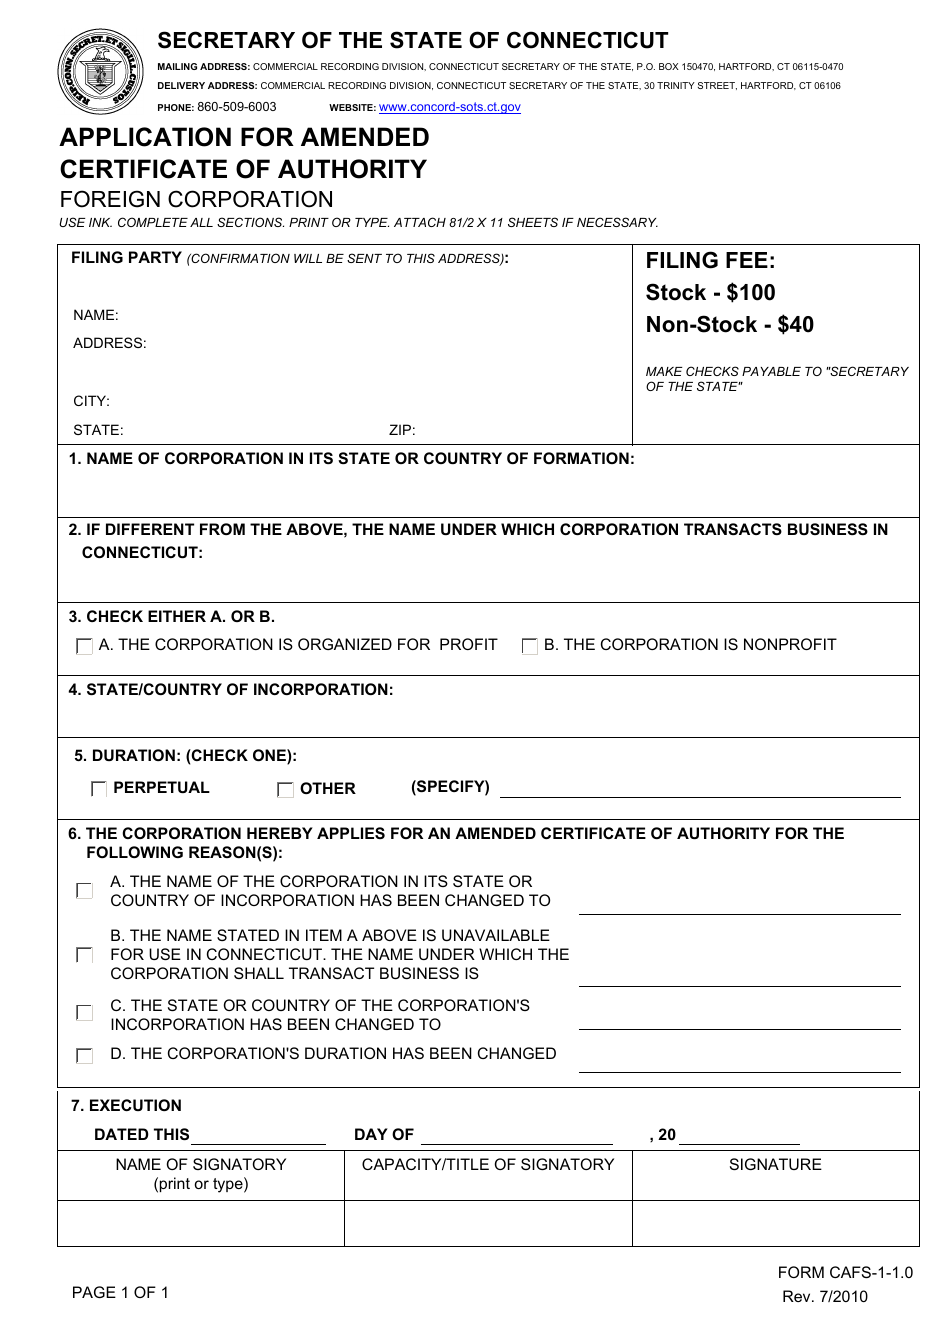 Form CAFS-1-1.0 Application for Amended Certificate of Authority - Foreign Corporation - Connecticut, Page 1